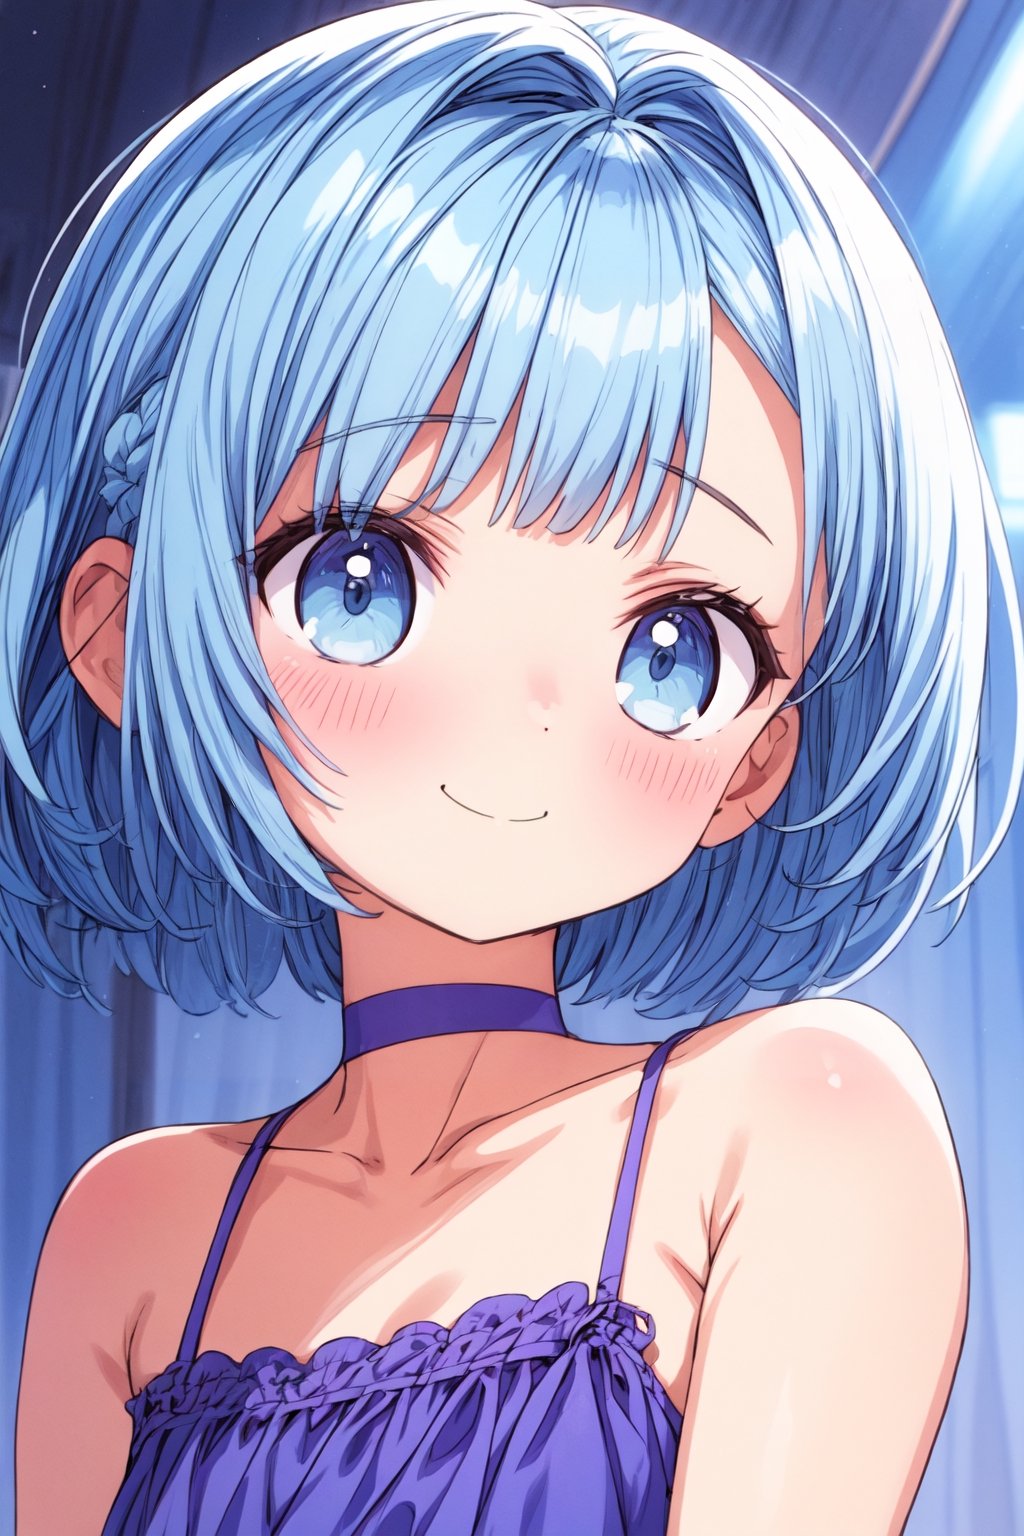 Masterpiece, best quality, extremely detailed, (illustration, official art: 1.1), 1 girl, ((light blue hair))), light blue hair, 10 years old,  ((blush)), cute face, big eyes, masterpiece, best quality, ((a very delicate and beautiful girl)))), amazing, beautiful detailed eyes, blunt bangs (((little delicate girl)))), tareme (true beautiful: 1.2),Official art、Top quality ultra-detailed CG art、a beauty girl：１.２）、lightblue hair、Glossy hair、smooth hair、large blue eyes、kawaii、bob cuts、Pink choker,ssmile、simple,camisole, (licking candy:1.2), ,